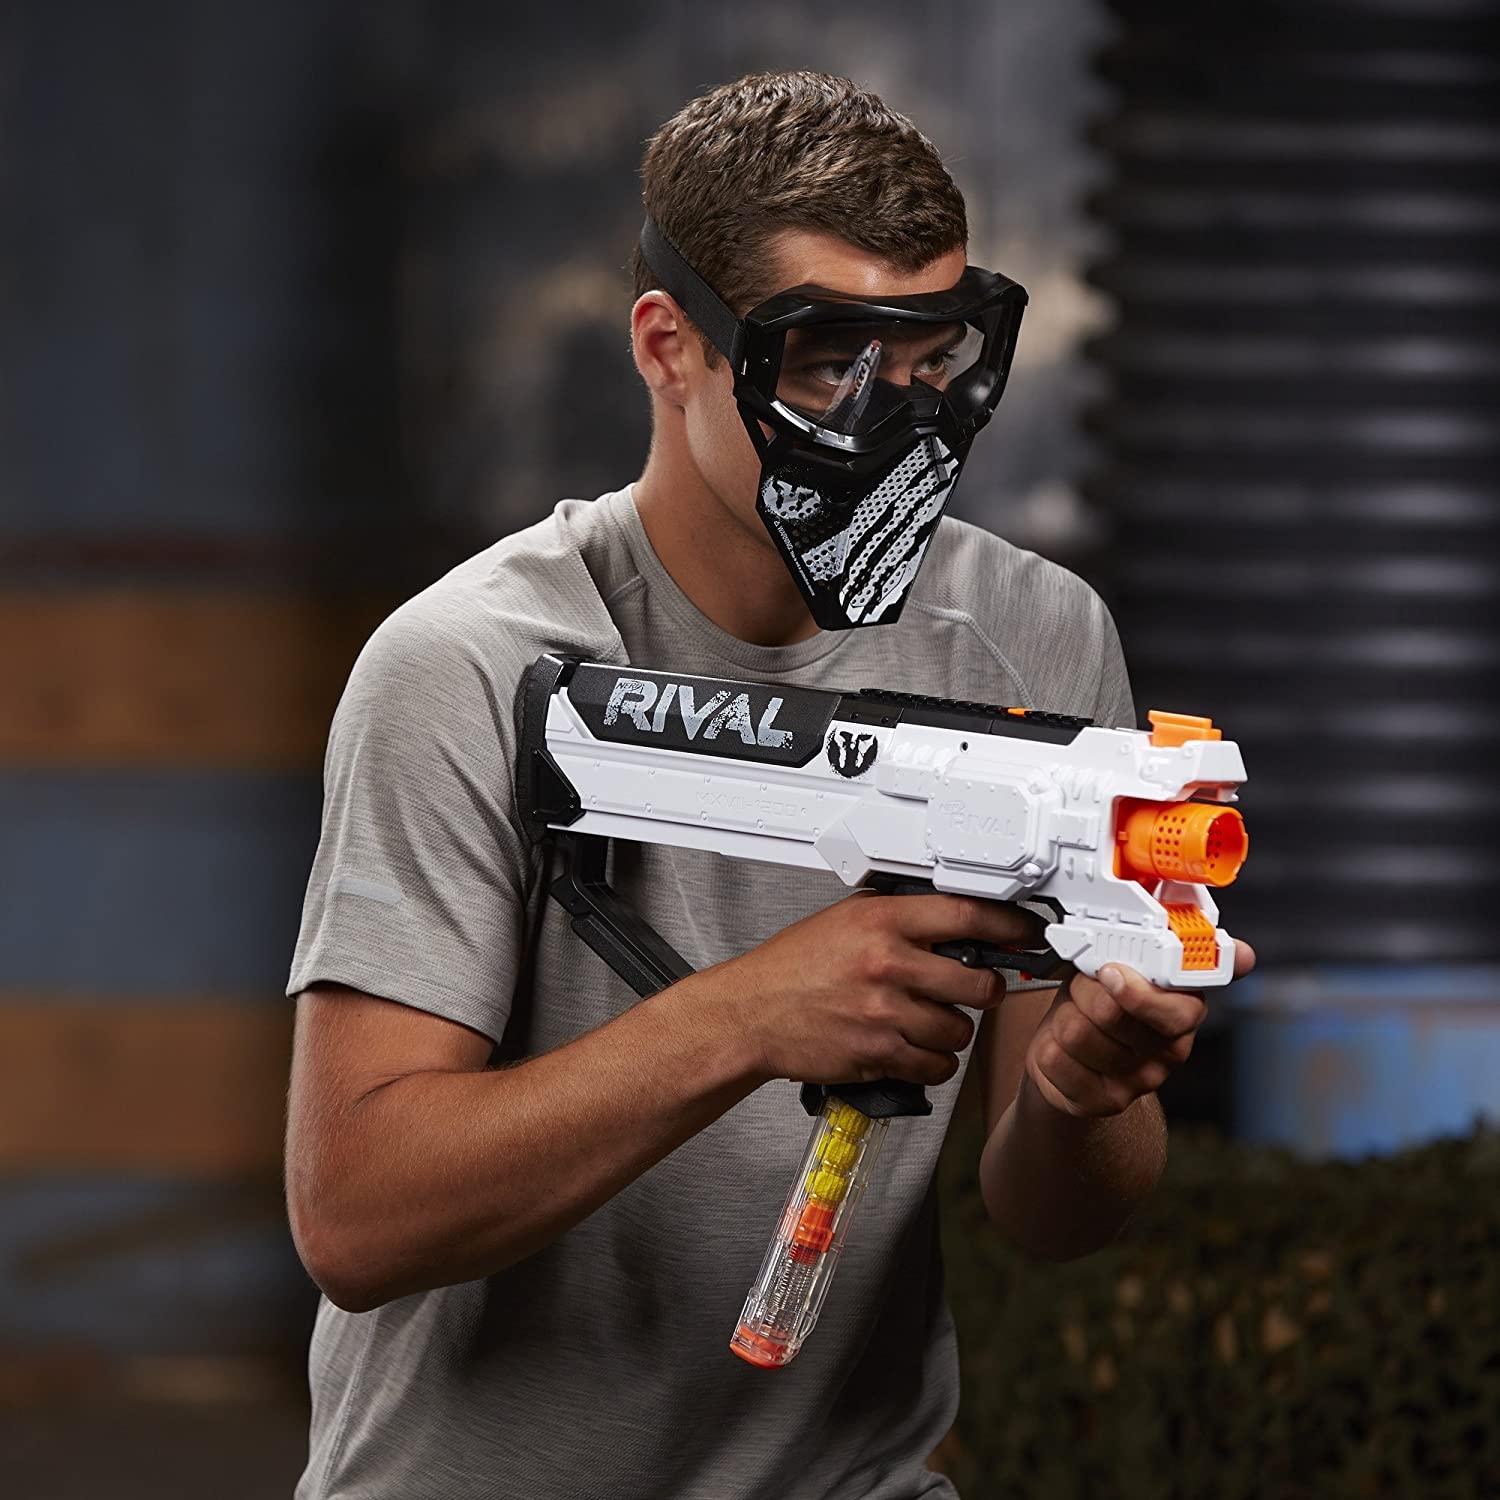 Nerf Rival Mask Blaster & Combat - BumbleToys - 14 Years & Up, Action Battling, Action Figures, Blasters, Boys, Dress Up Accessories, MASK